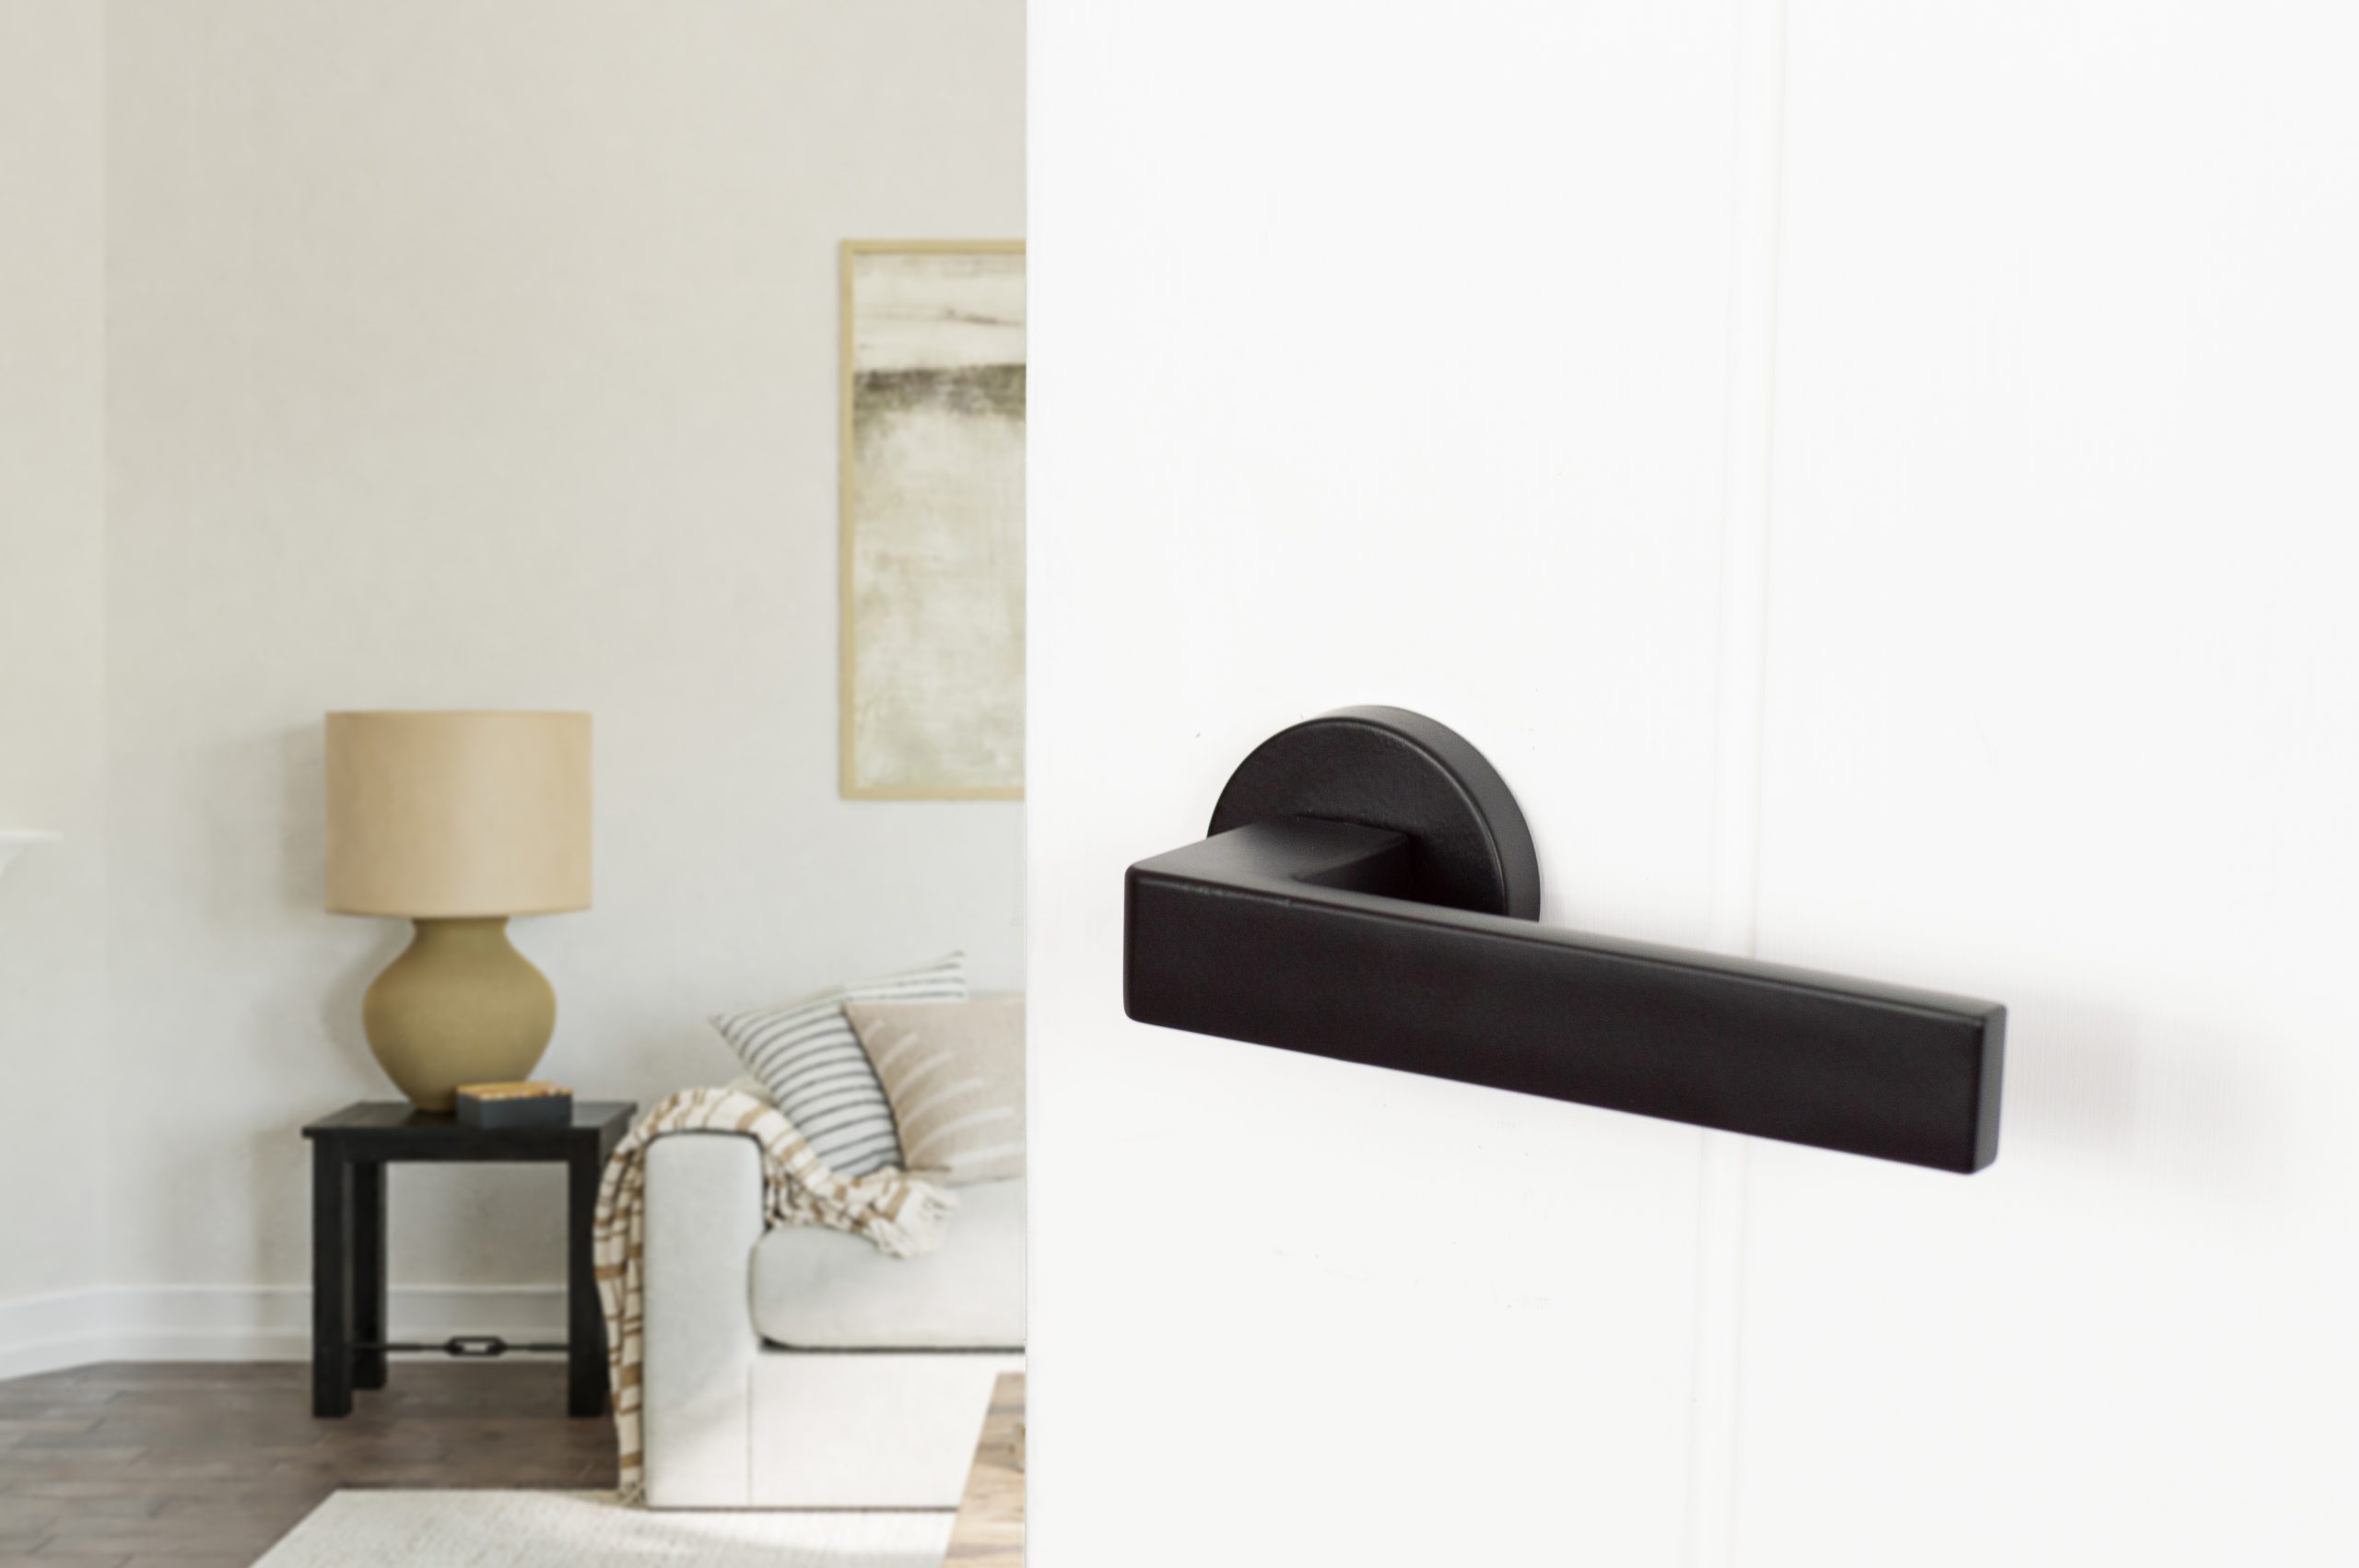 How do I know what door handles to buy? image